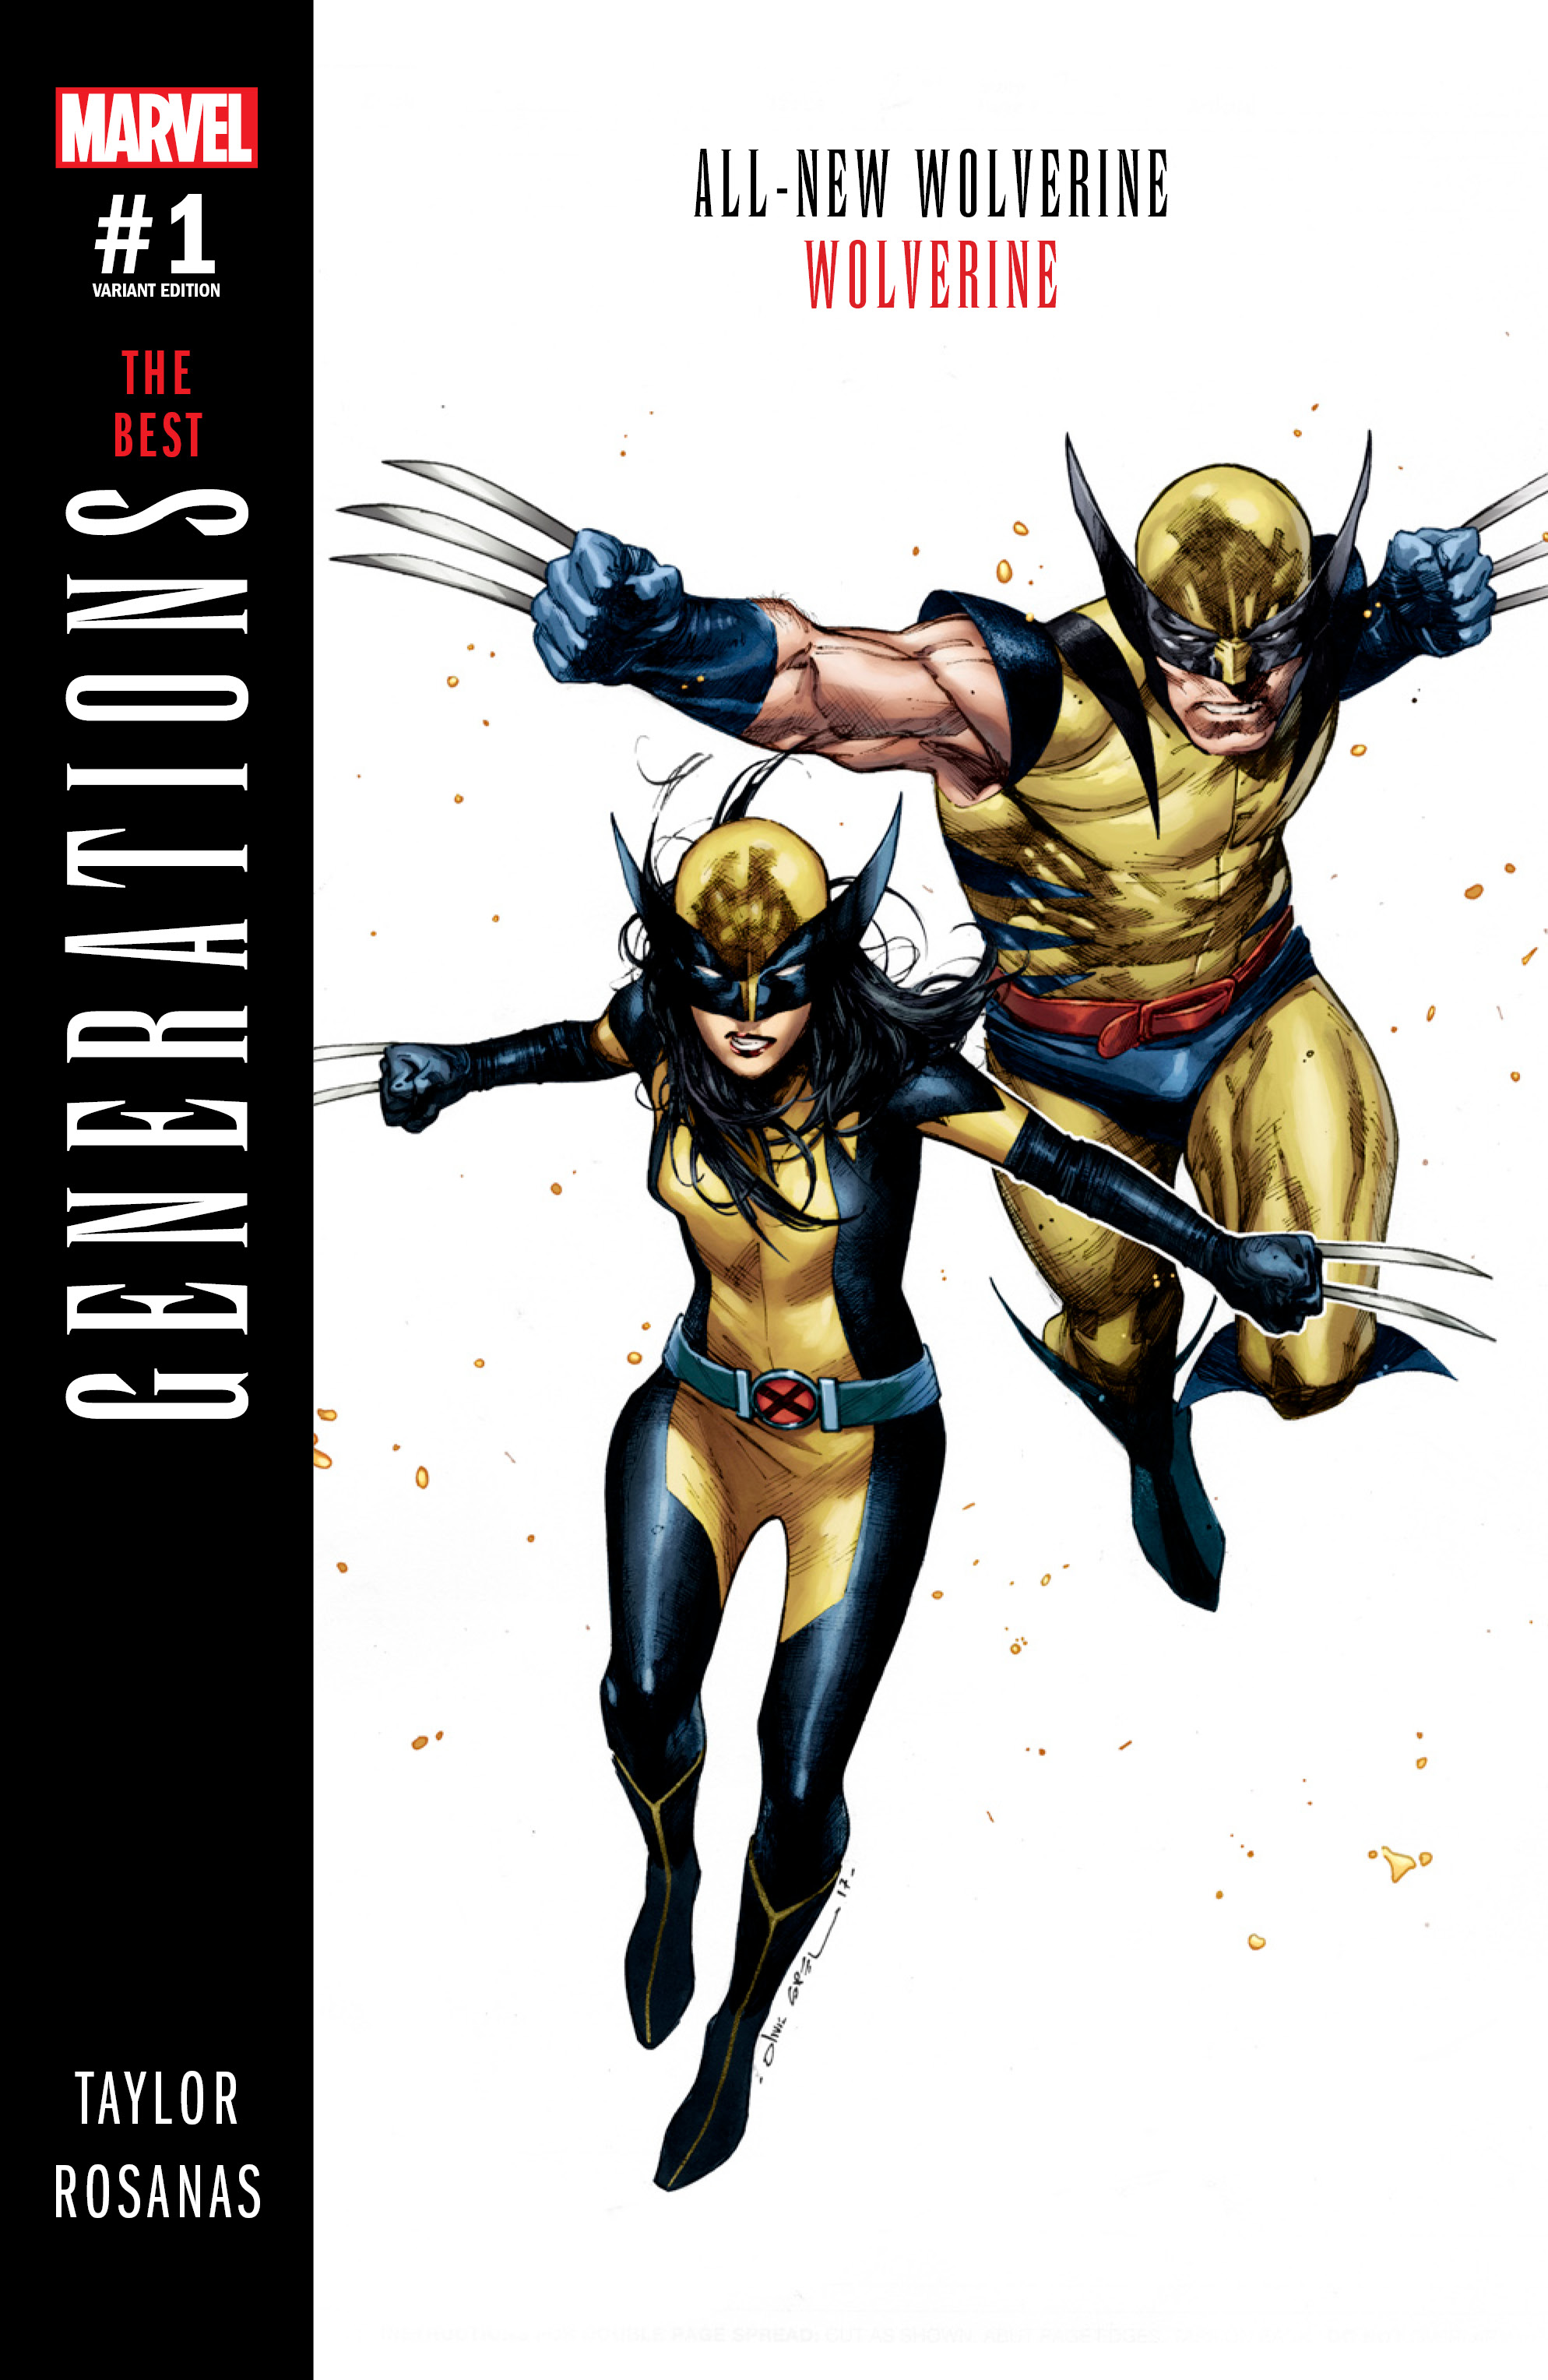 The Biggest and Best Heroes Team-up for a Titanic Tale Marvel Comics Presents GENERATIONS 